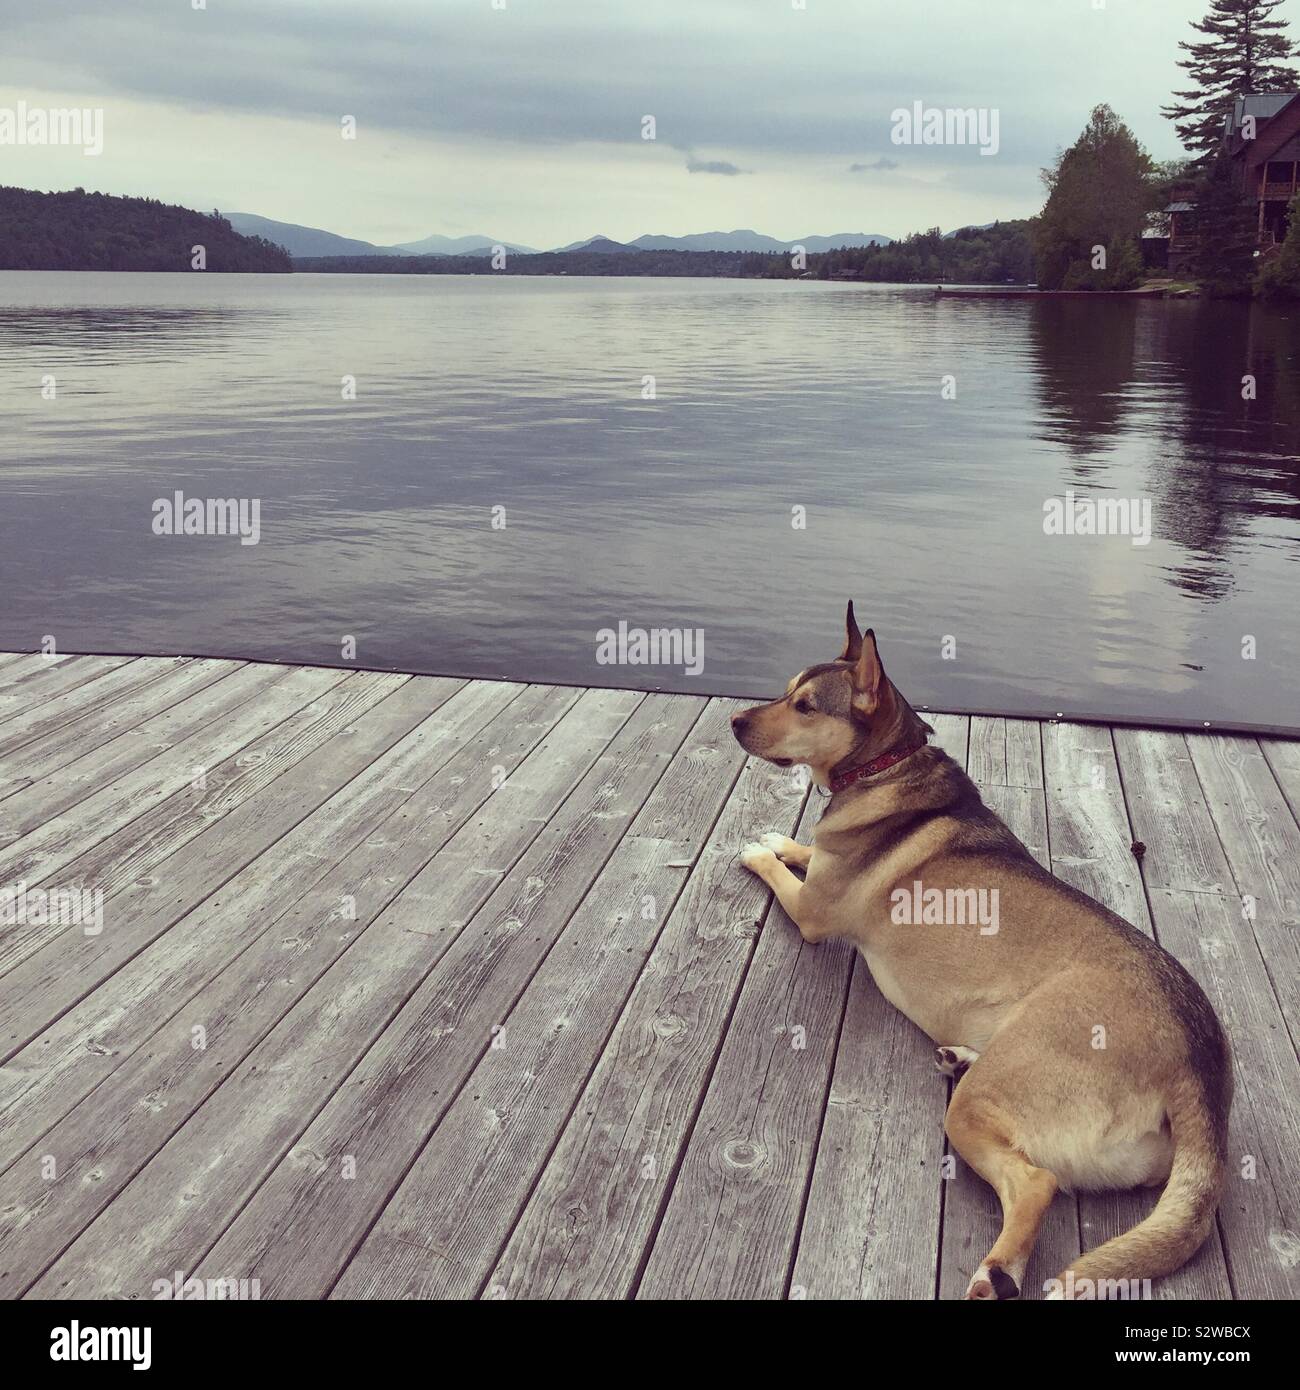 Our dog sitting on the dock in lake placid. Stock Photo